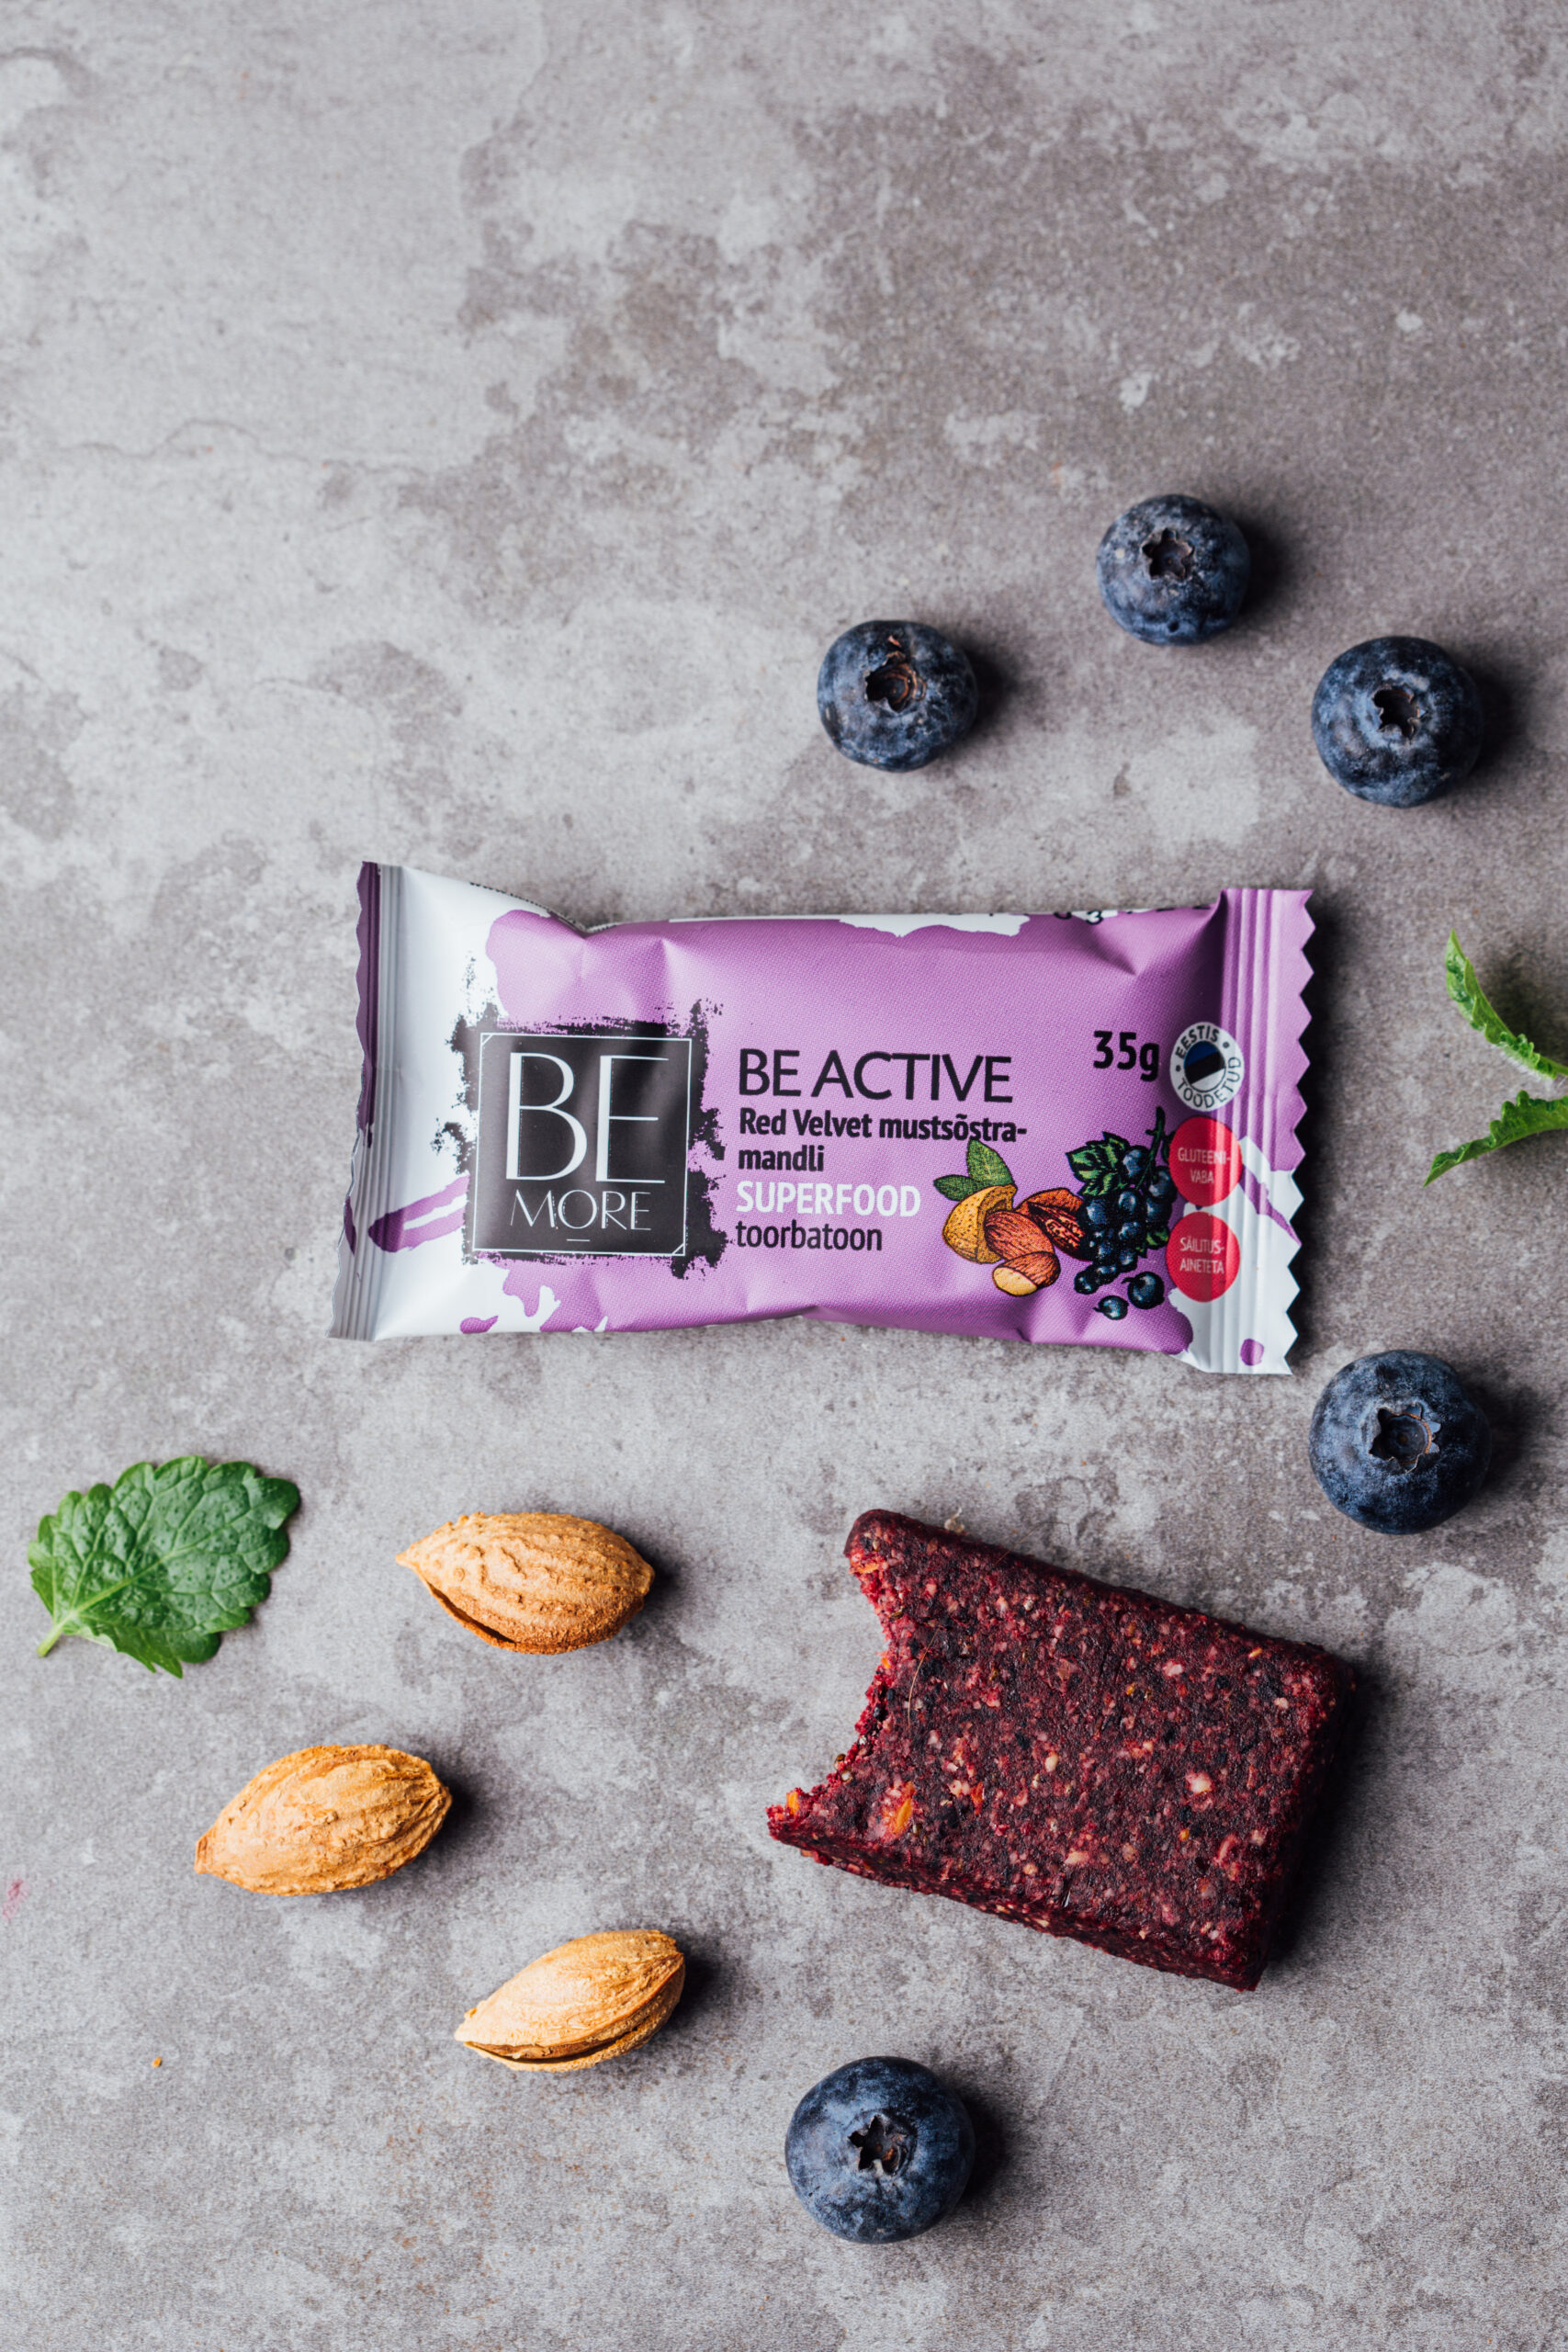 Be Fit, Beautiful & Active raw bars - 2+2+2 pc